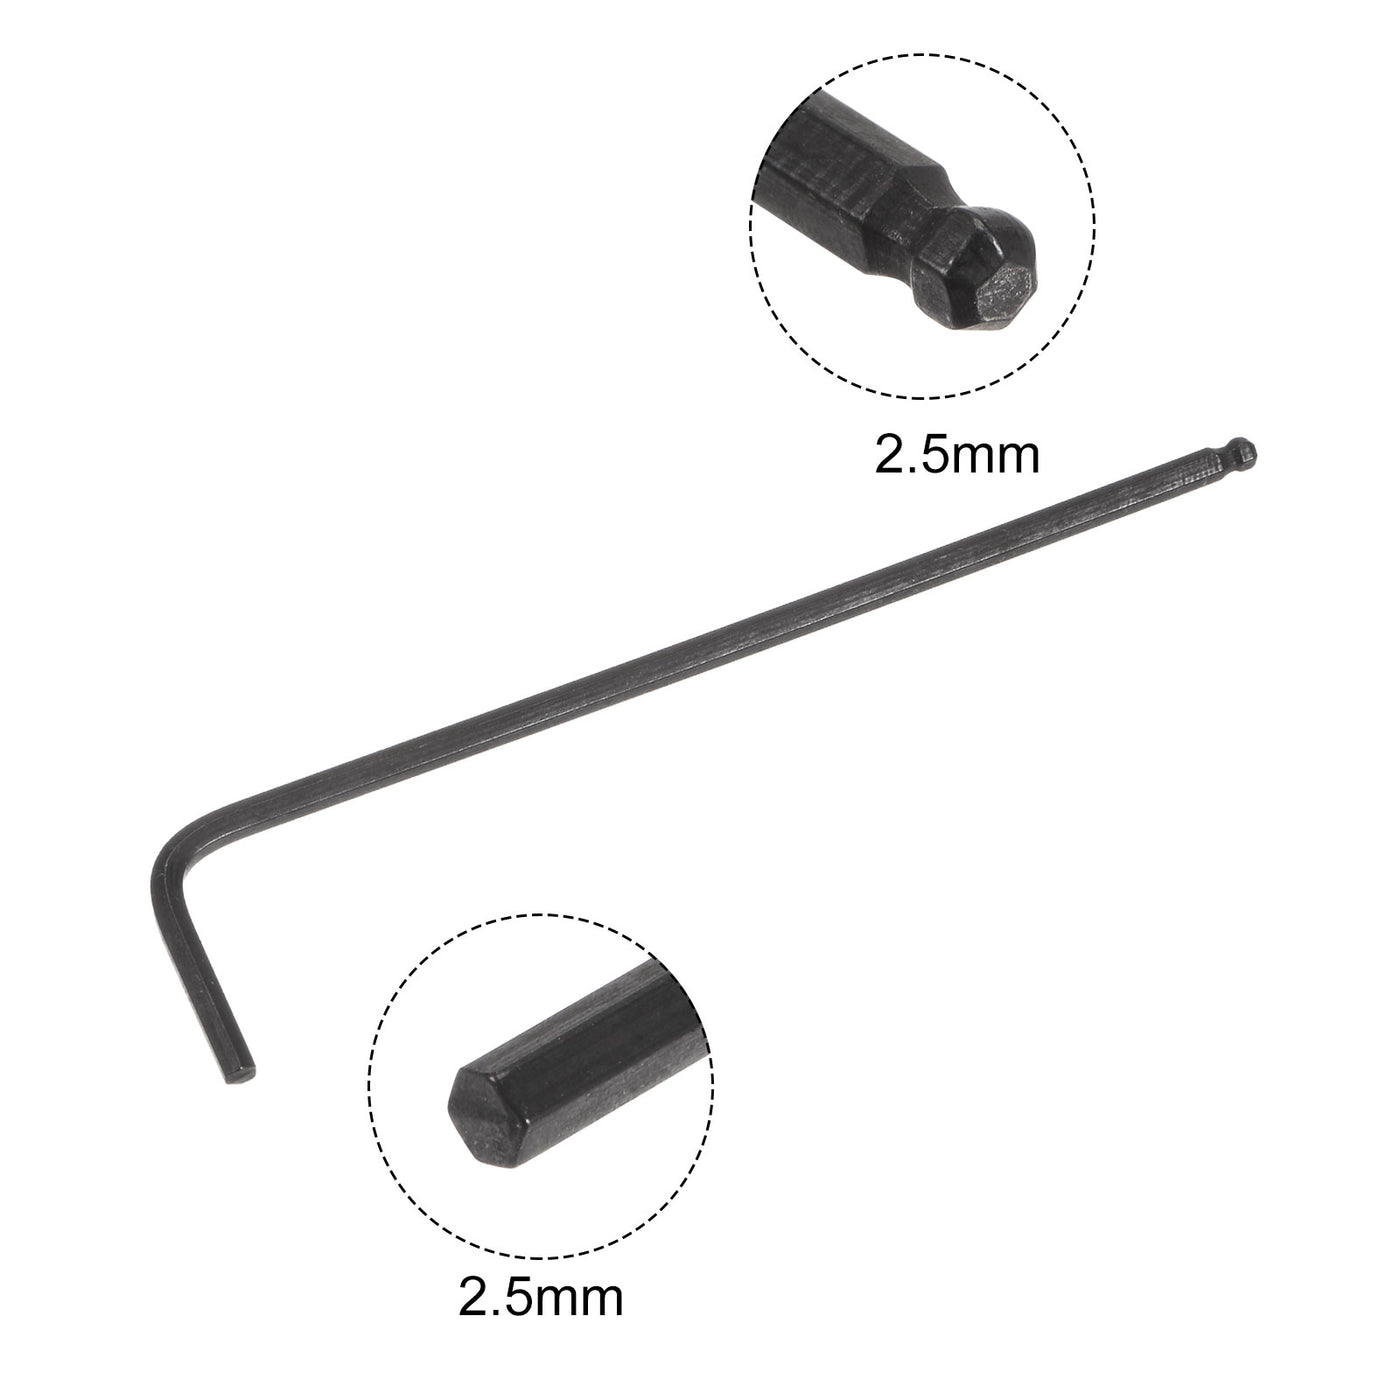 uxcell Uxcell 2.5mm Ball End Hex Key Wrench, L Shaped Long Arm CR-V Repairing Tool, Black